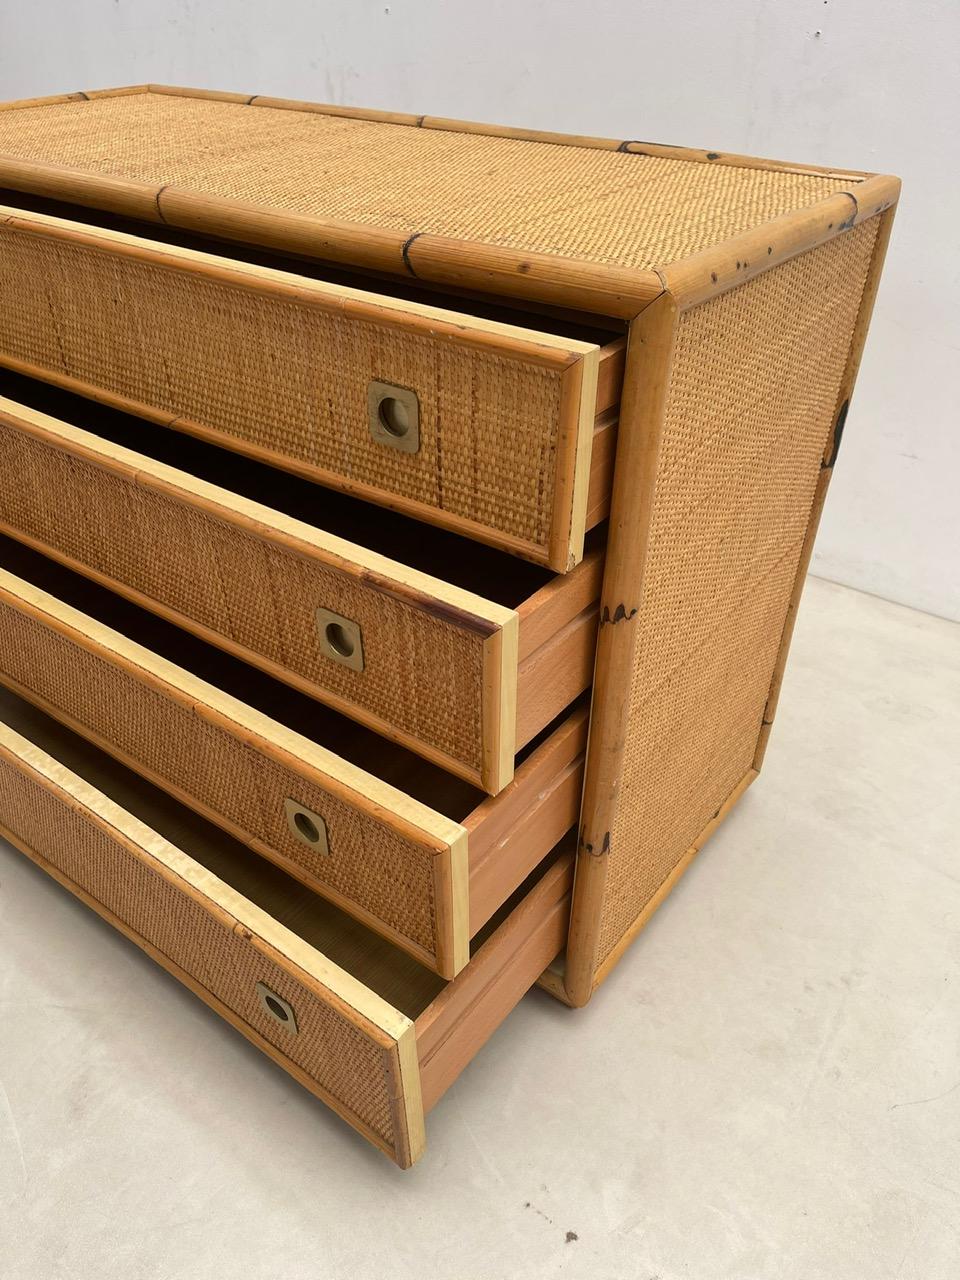 Dal Vera Bamboo and Wicker/Rattan Chest of Drawers, Italy 1960s For Sale 8